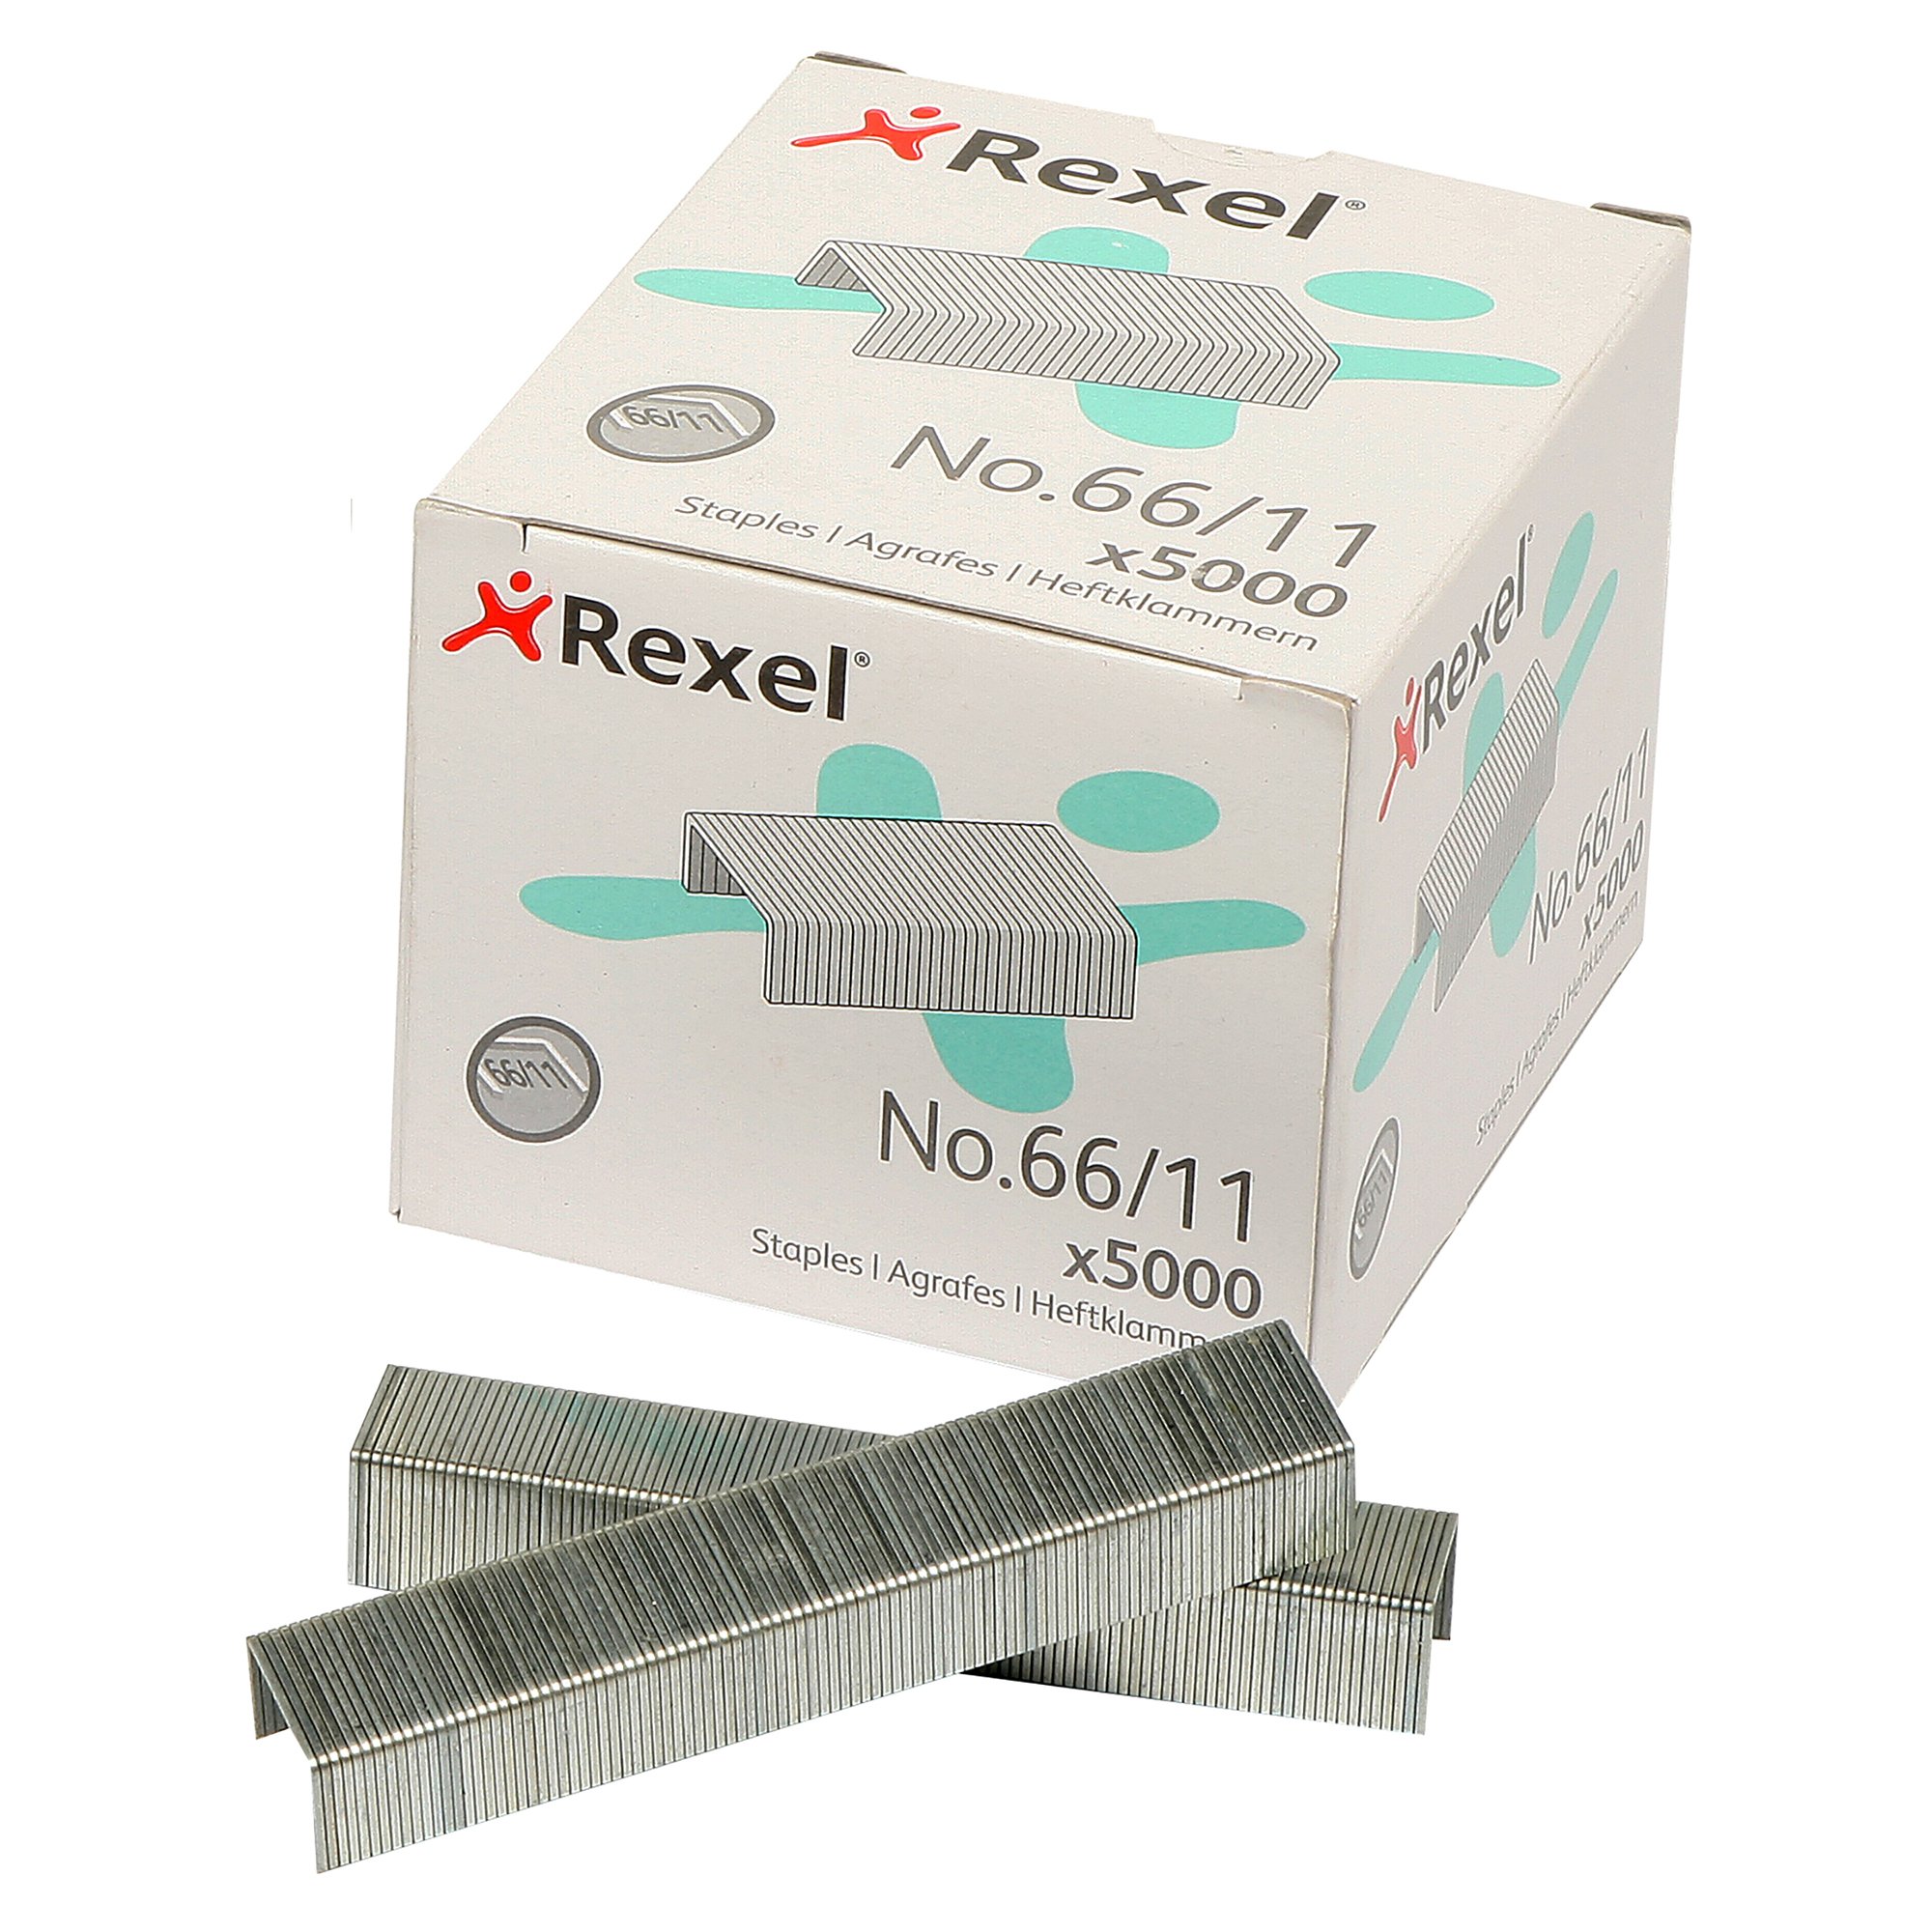 Rexel 66/11 Staples 11mm R06070 (Box 5000) - Click Image to Close